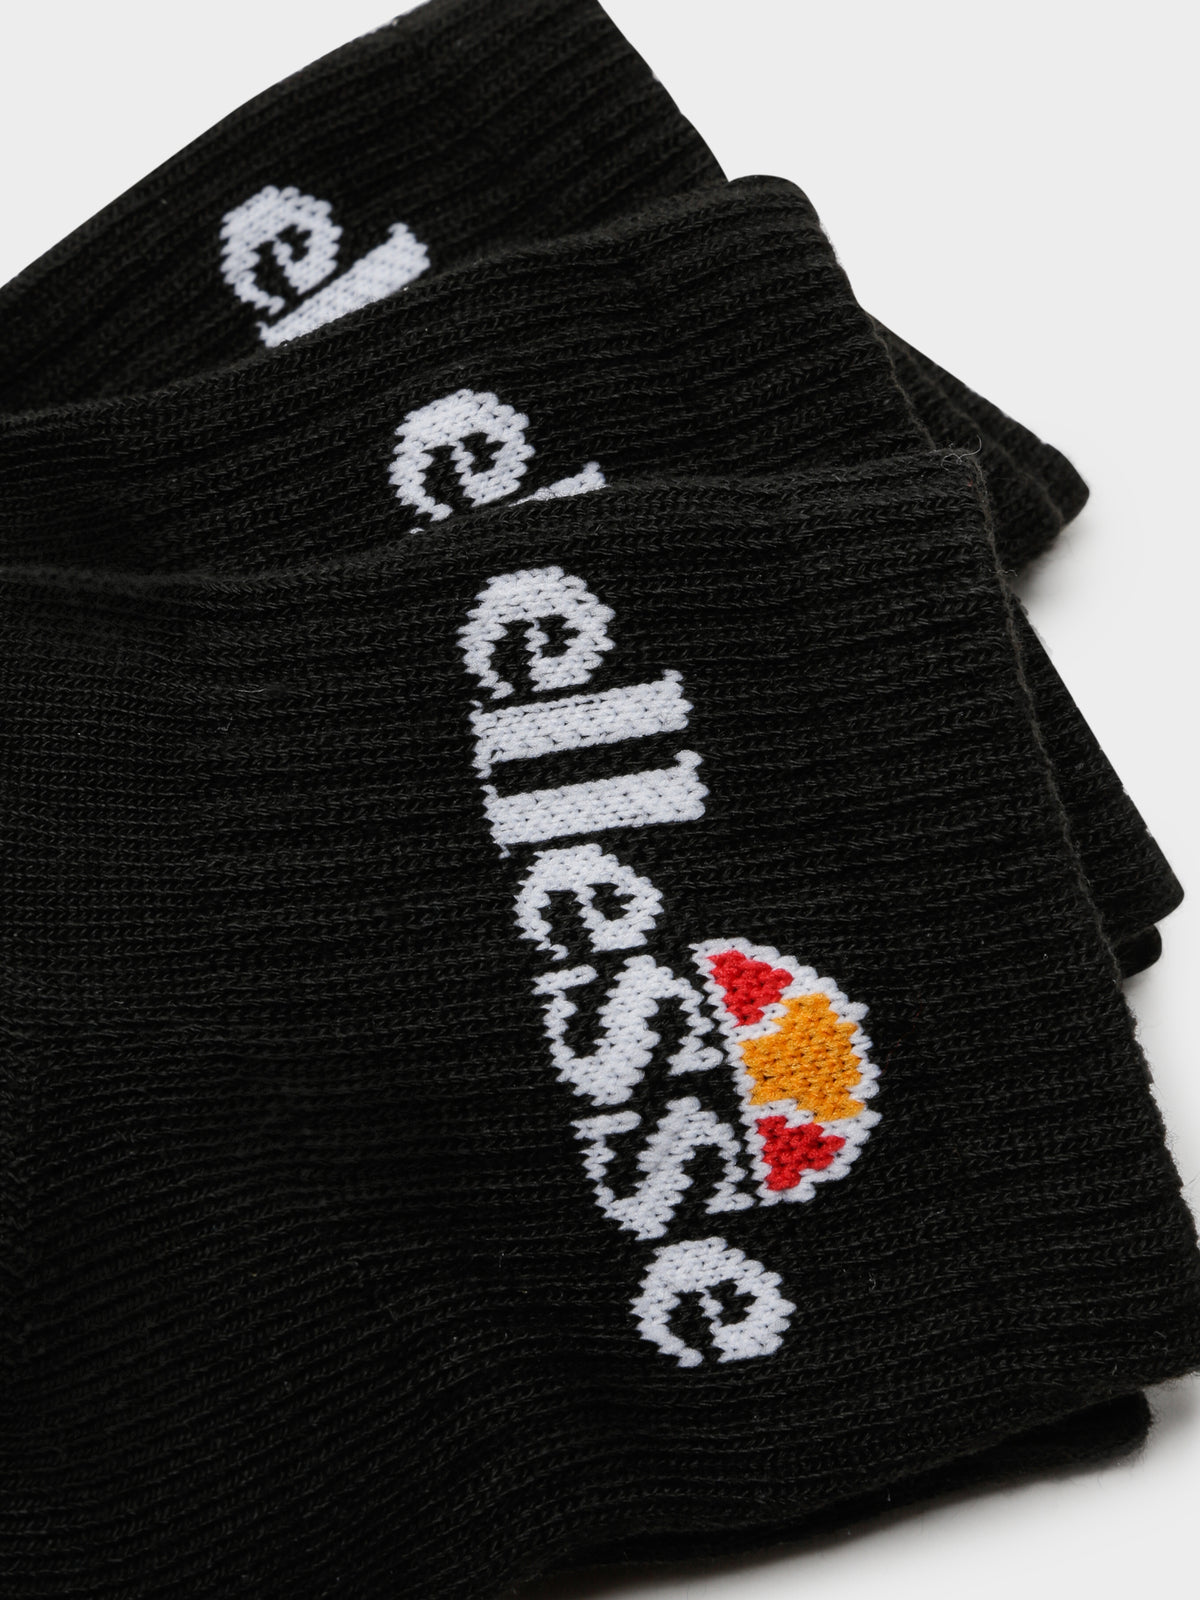 3 Pairs of Rallo Ankle Socks in Black